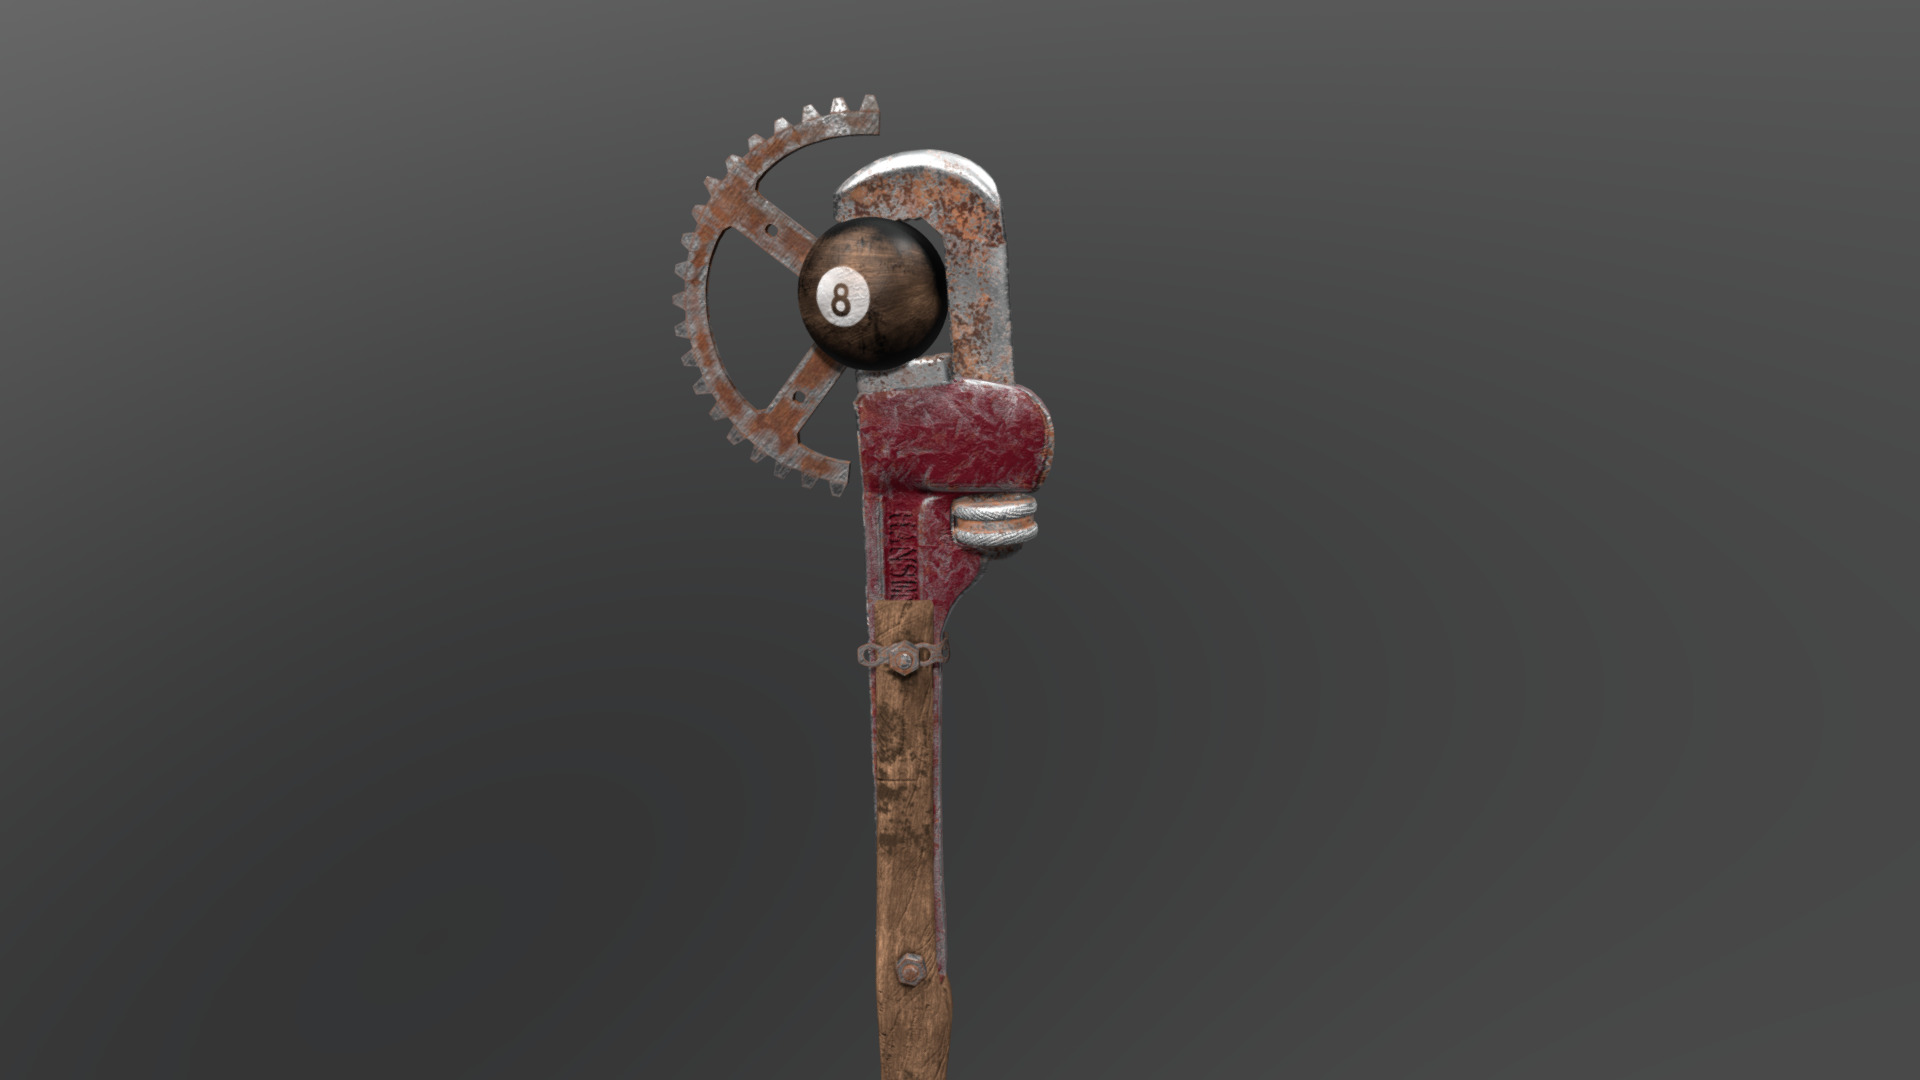 A post-apocalyptic war-axe, made from a wrench, an 8-ball and the cog from a bicycle. A nasty, makeshift weapons 3d model